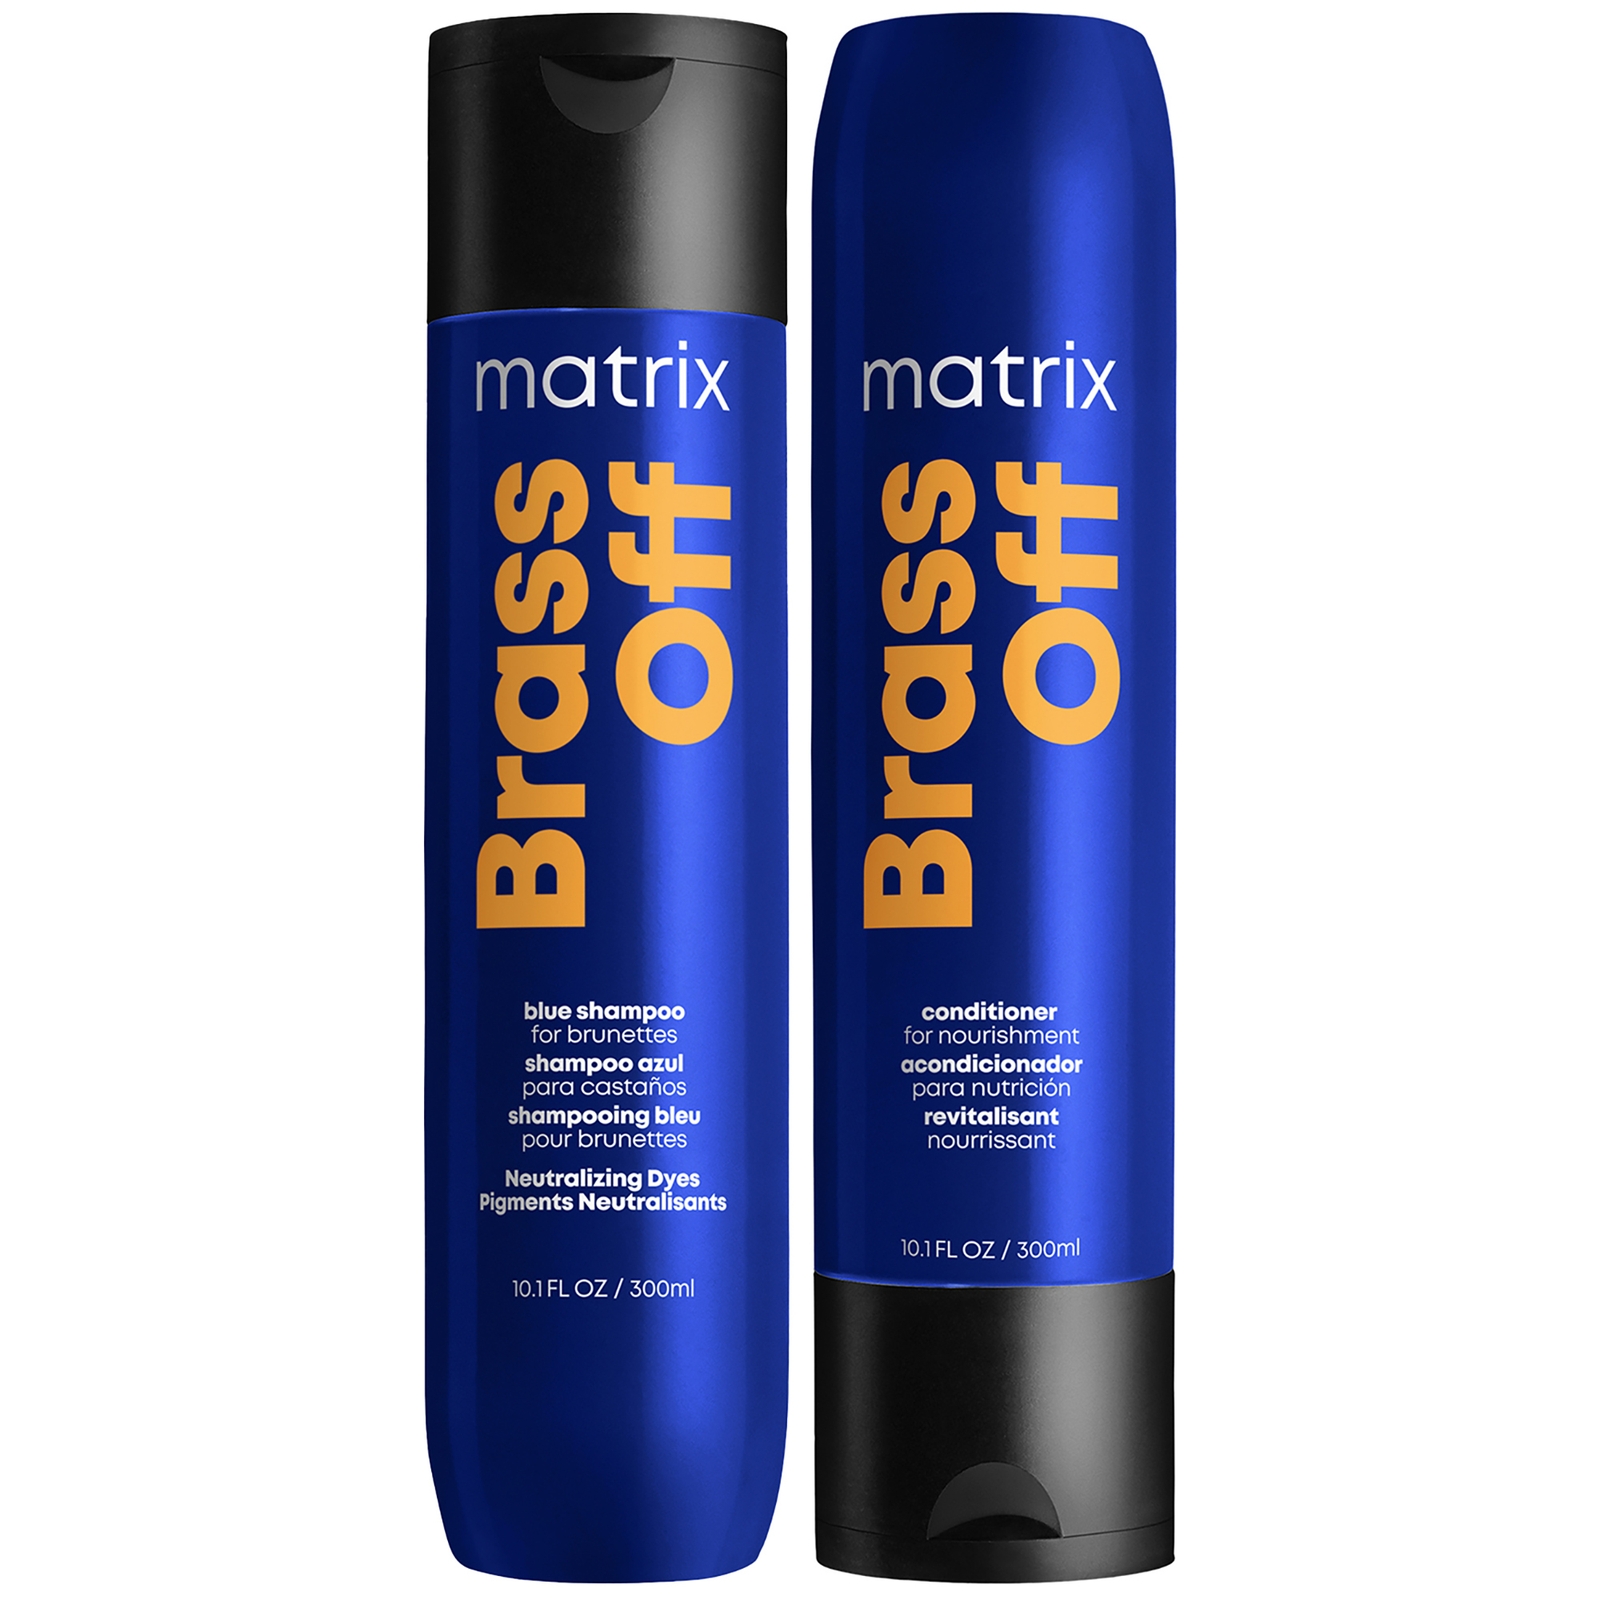 Image of Matrix Brass Off Colour Correcting Blue Anti-Brass Shampoo and Conditioner Duo Set For Lightened Brunettes 300ml